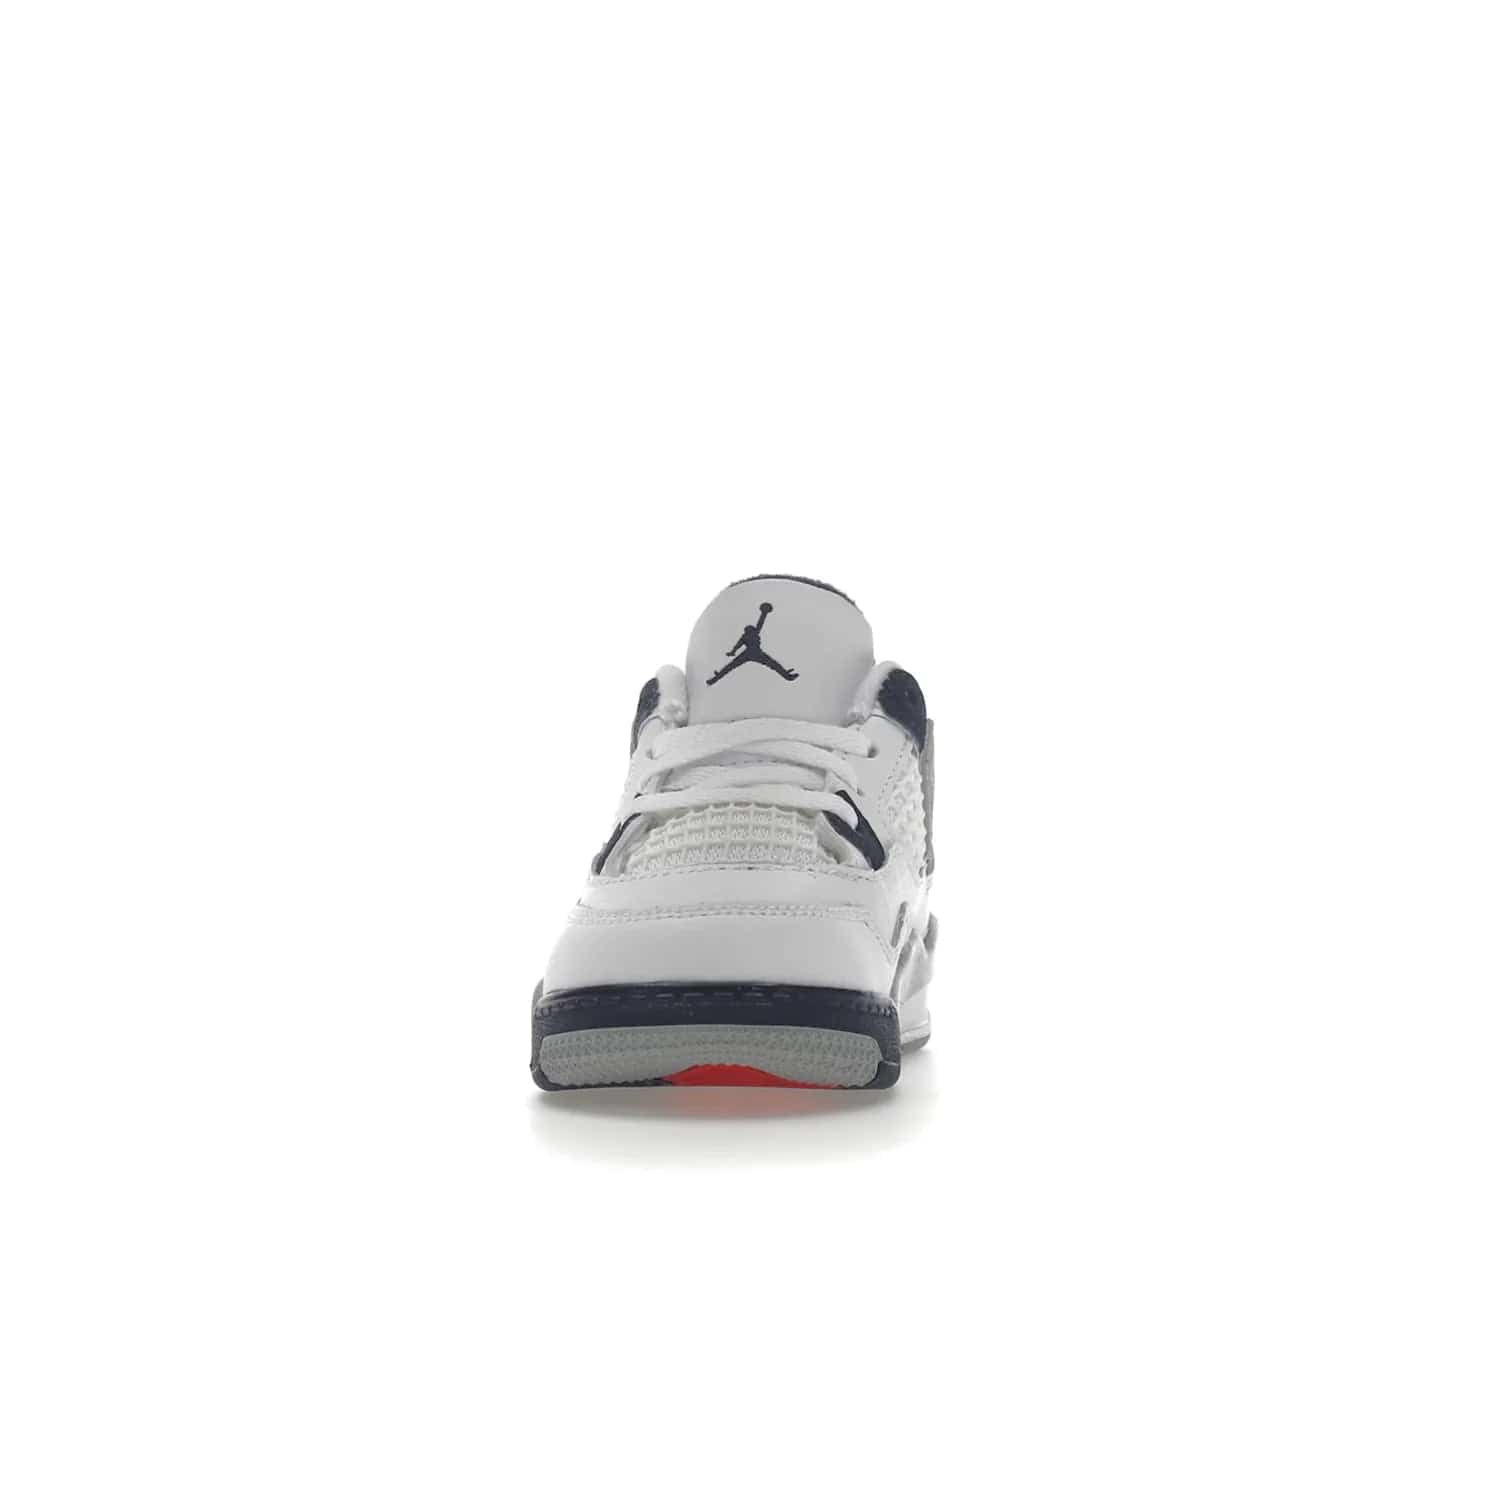 Jordan 4 Retro Midnight Navy (TD) - Image 11 - Only at www.BallersClubKickz.com - Introducing the Jordan 4 Retro Midnight Navy (TD) for kids. White leather upper with navy and grey accents plus fire red detailing. Perfect for everyday wear. Get yours before they sell out.